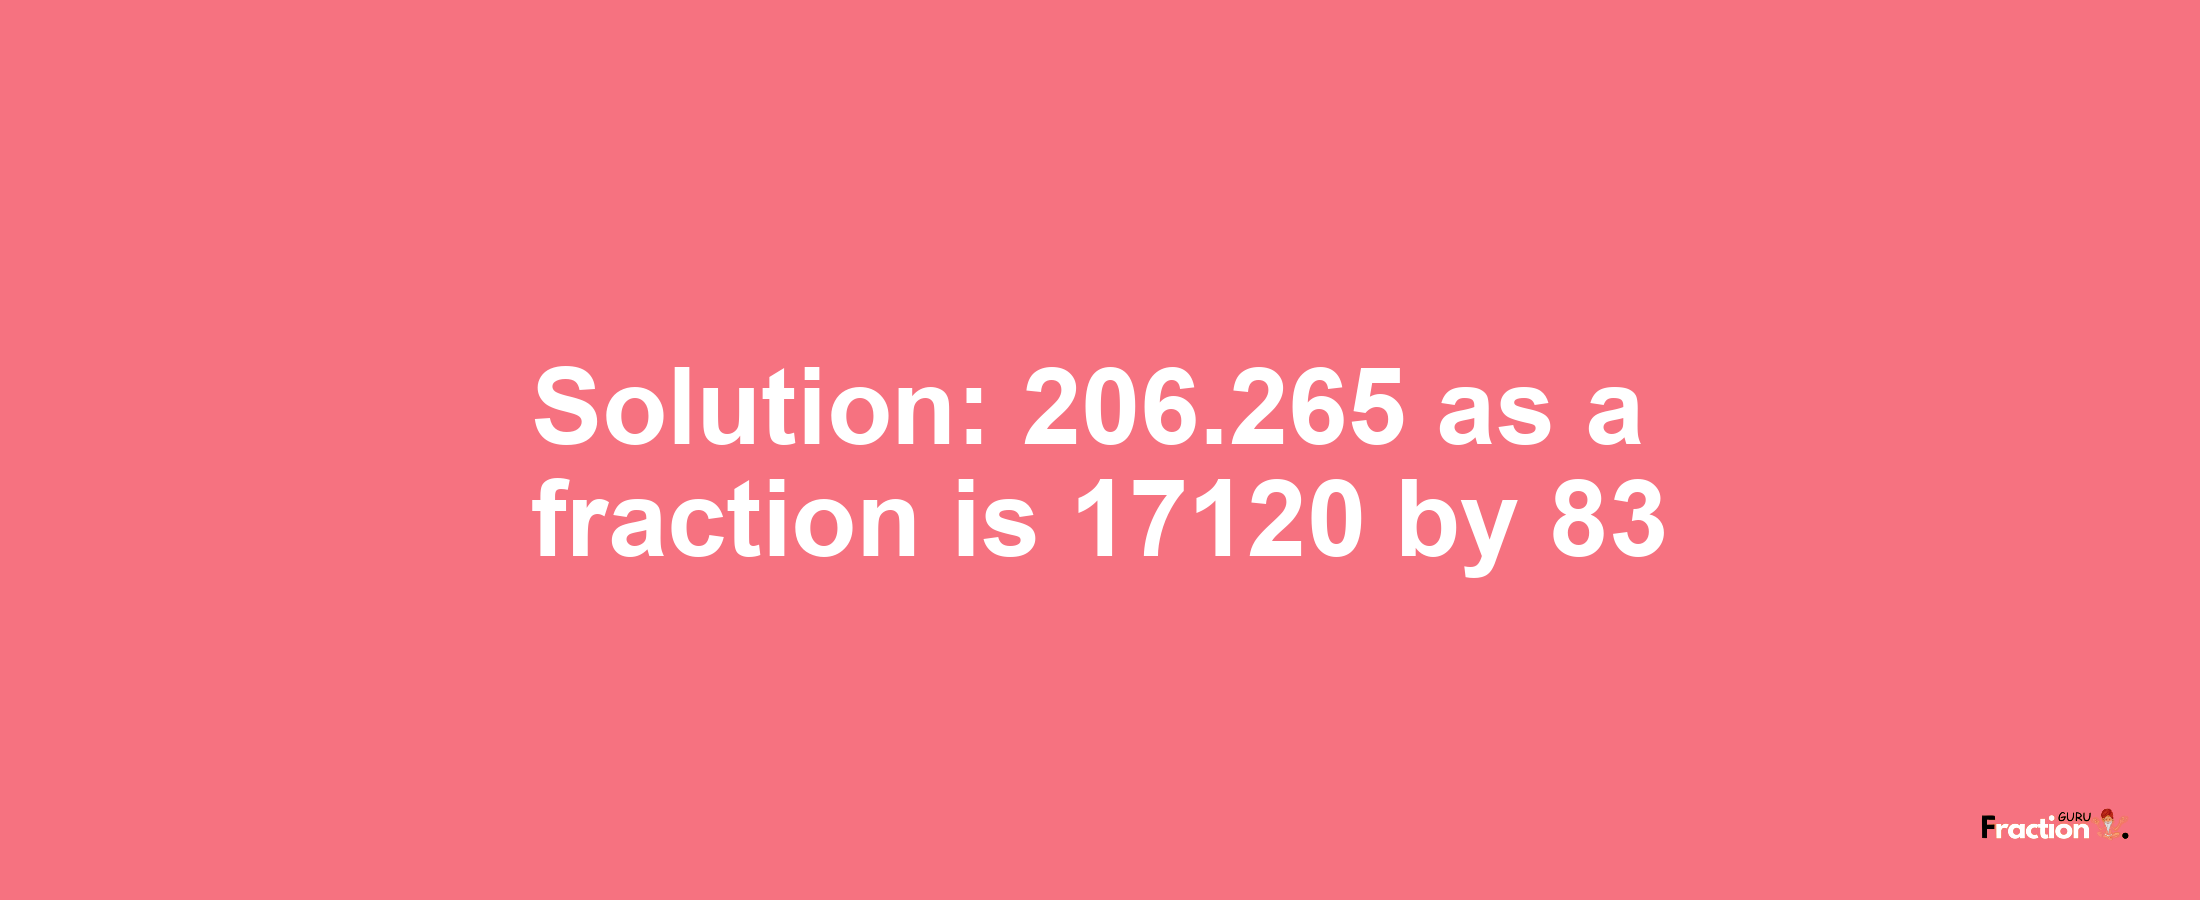 Solution:206.265 as a fraction is 17120/83